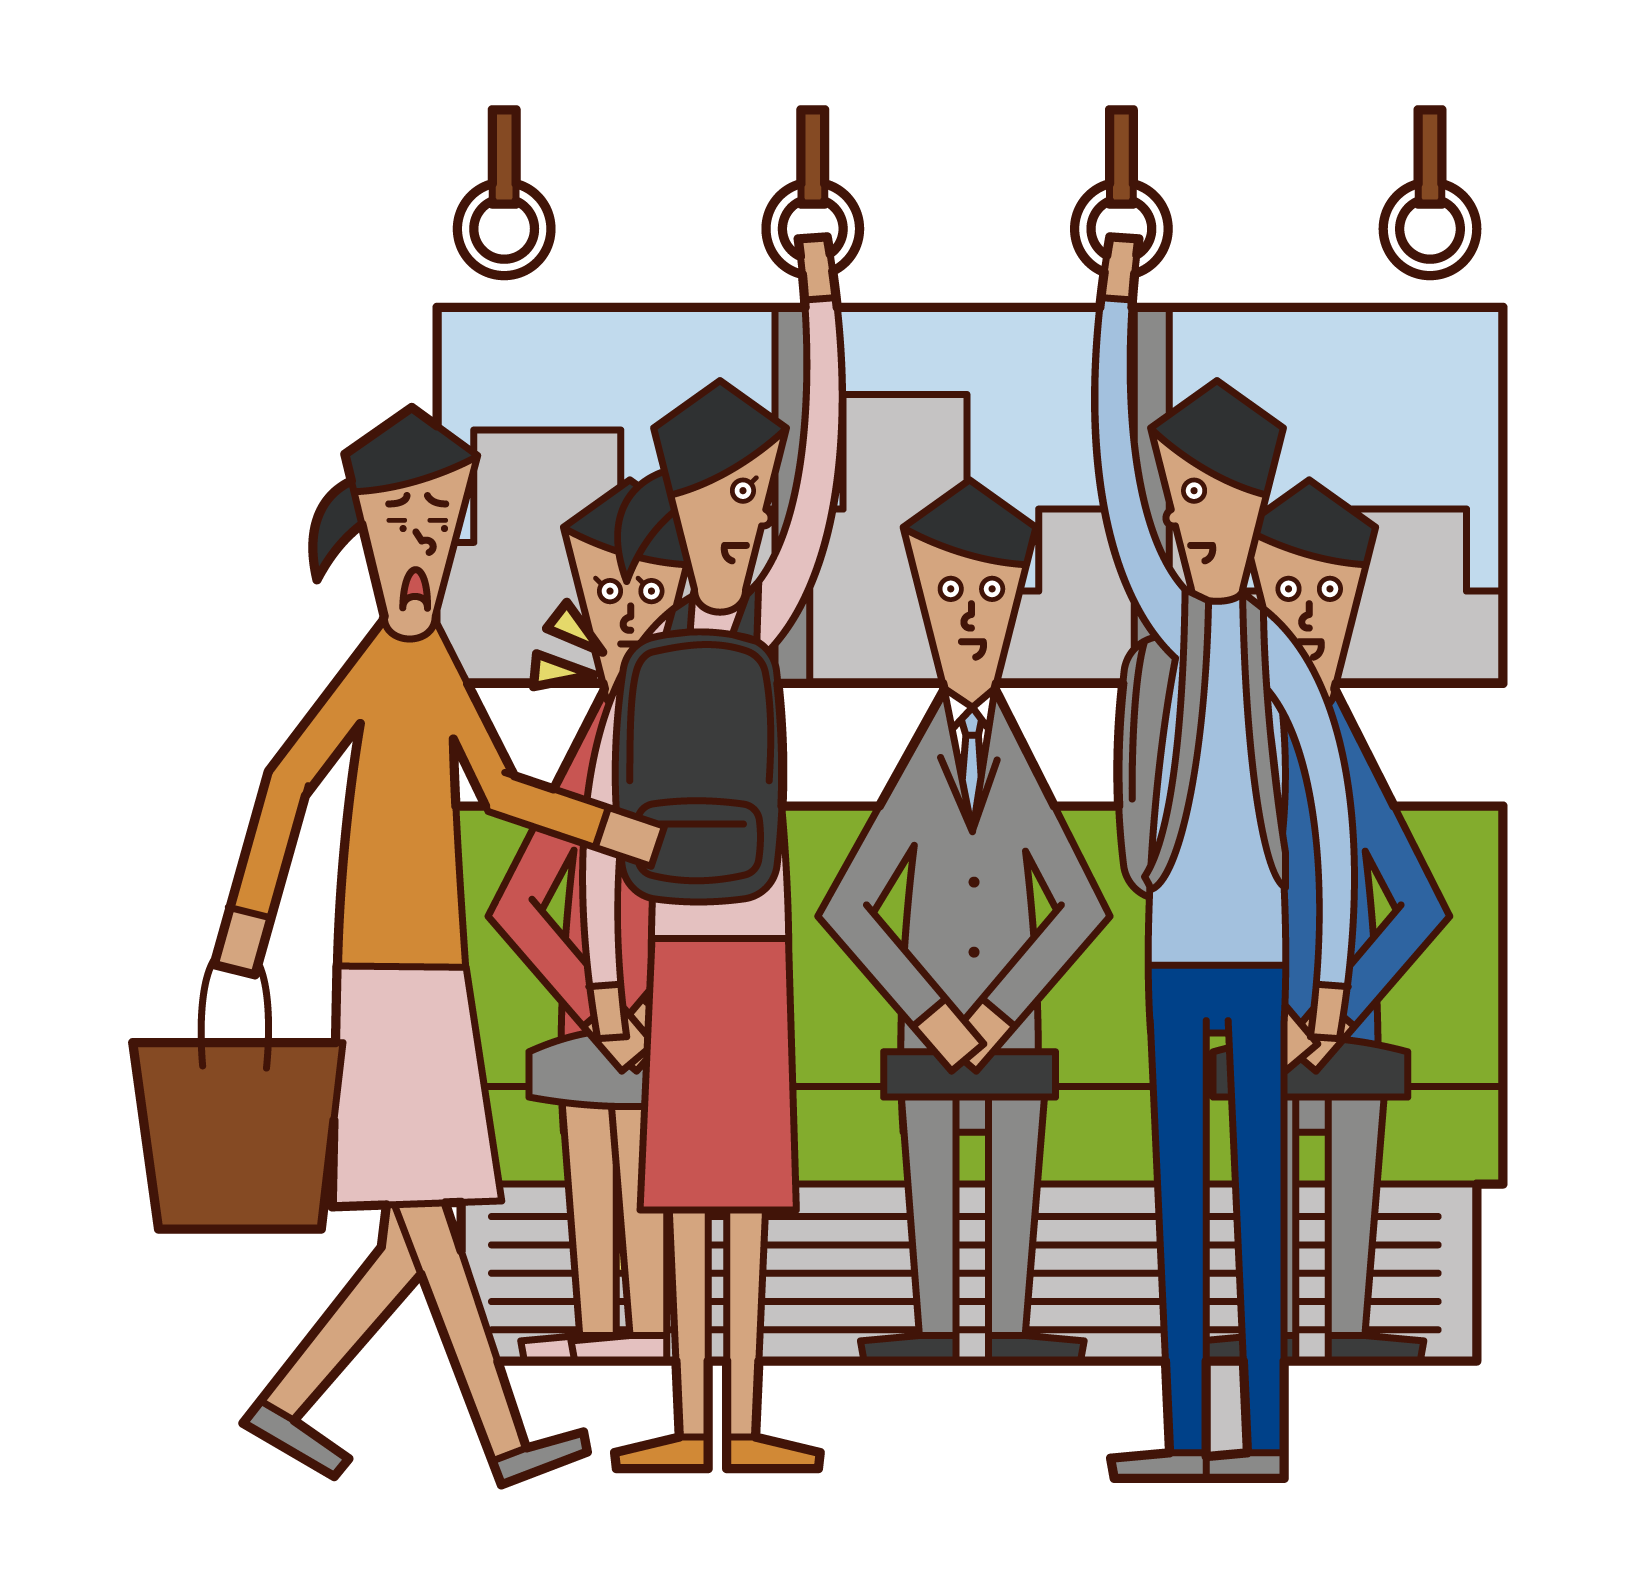 Illustration of luggage (woman) getting in the way on the train